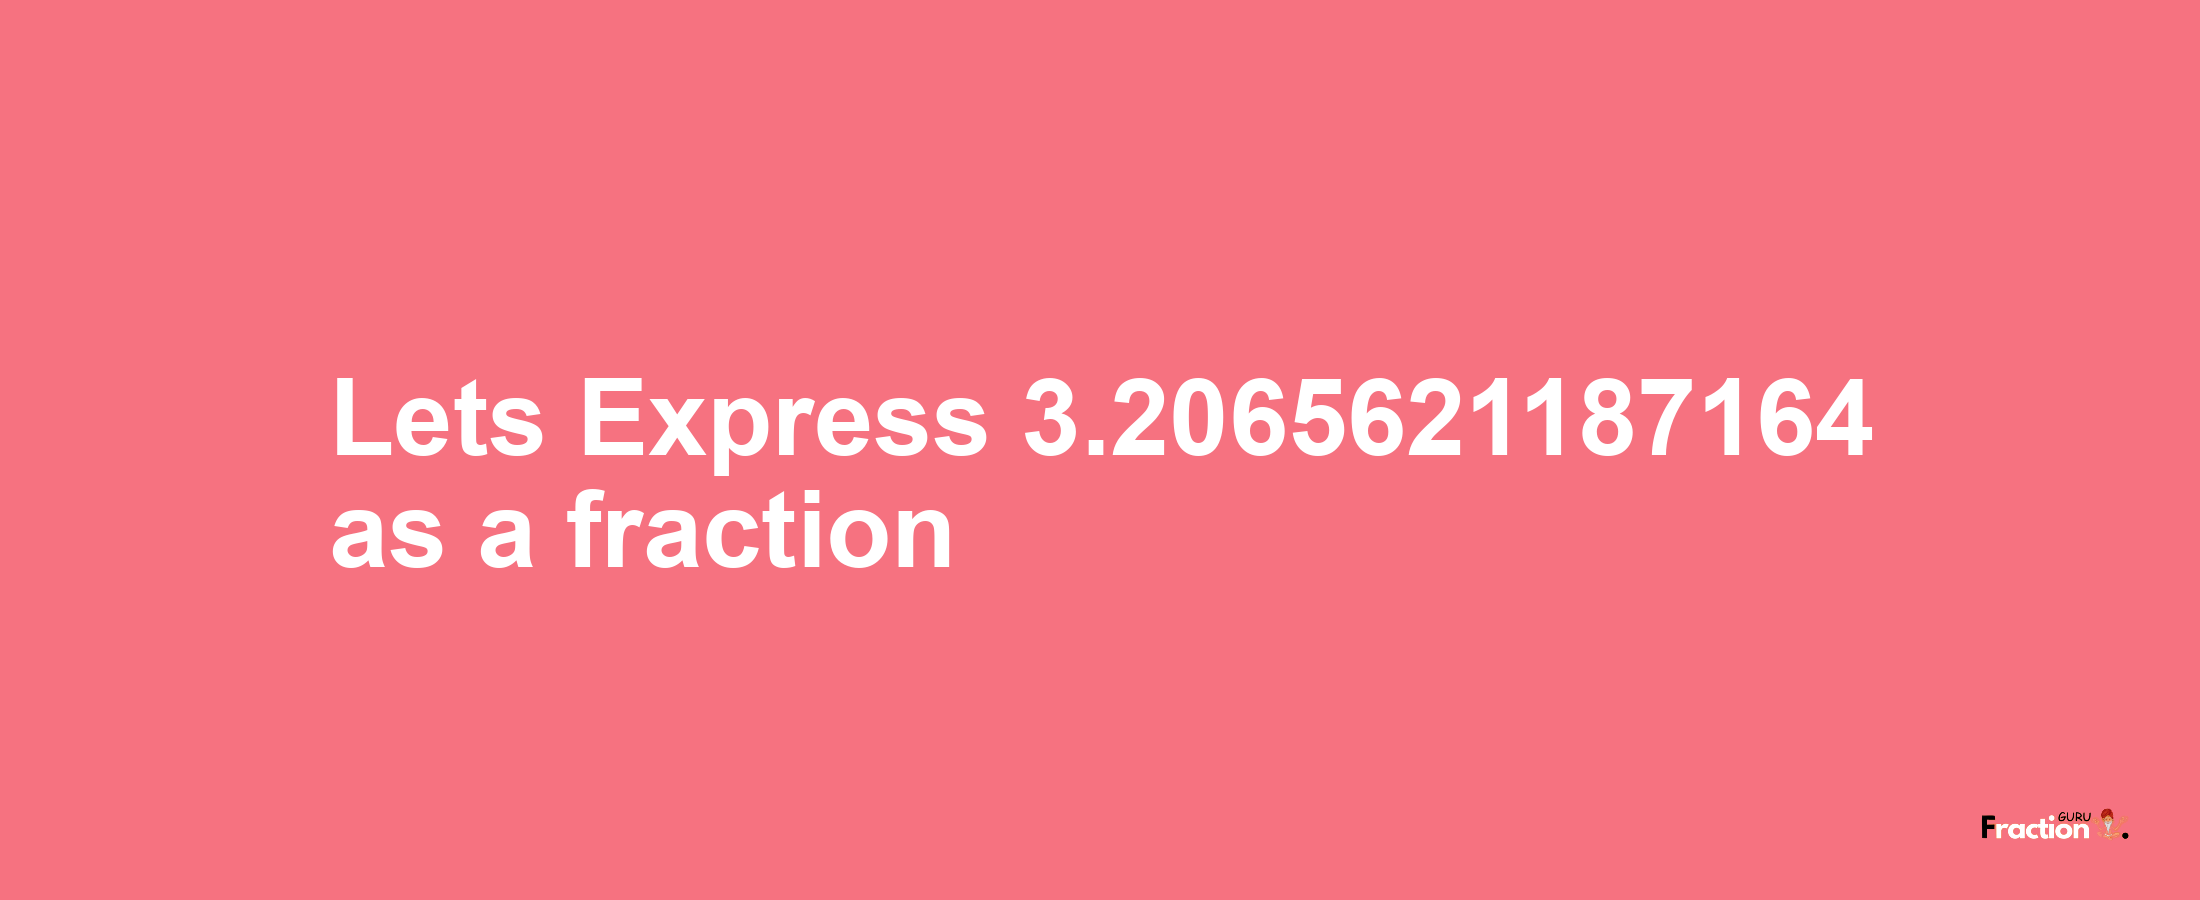 Lets Express 3.2065621187164 as afraction